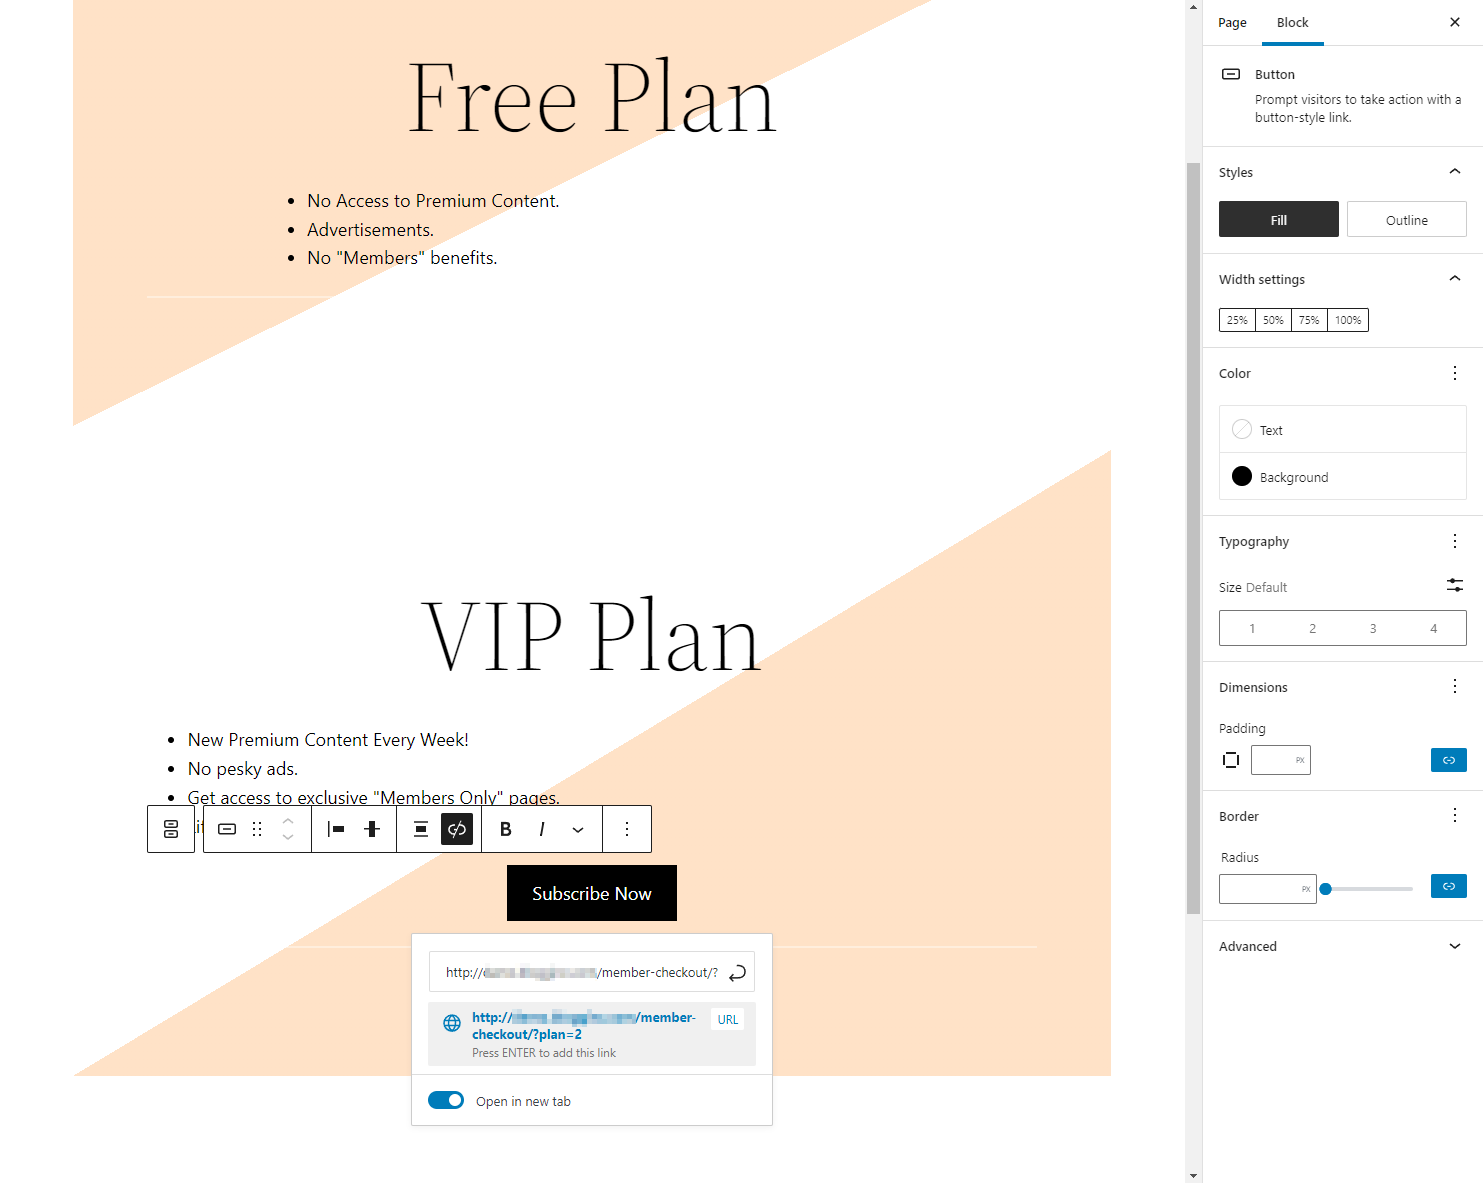 Convert free users pricing plans